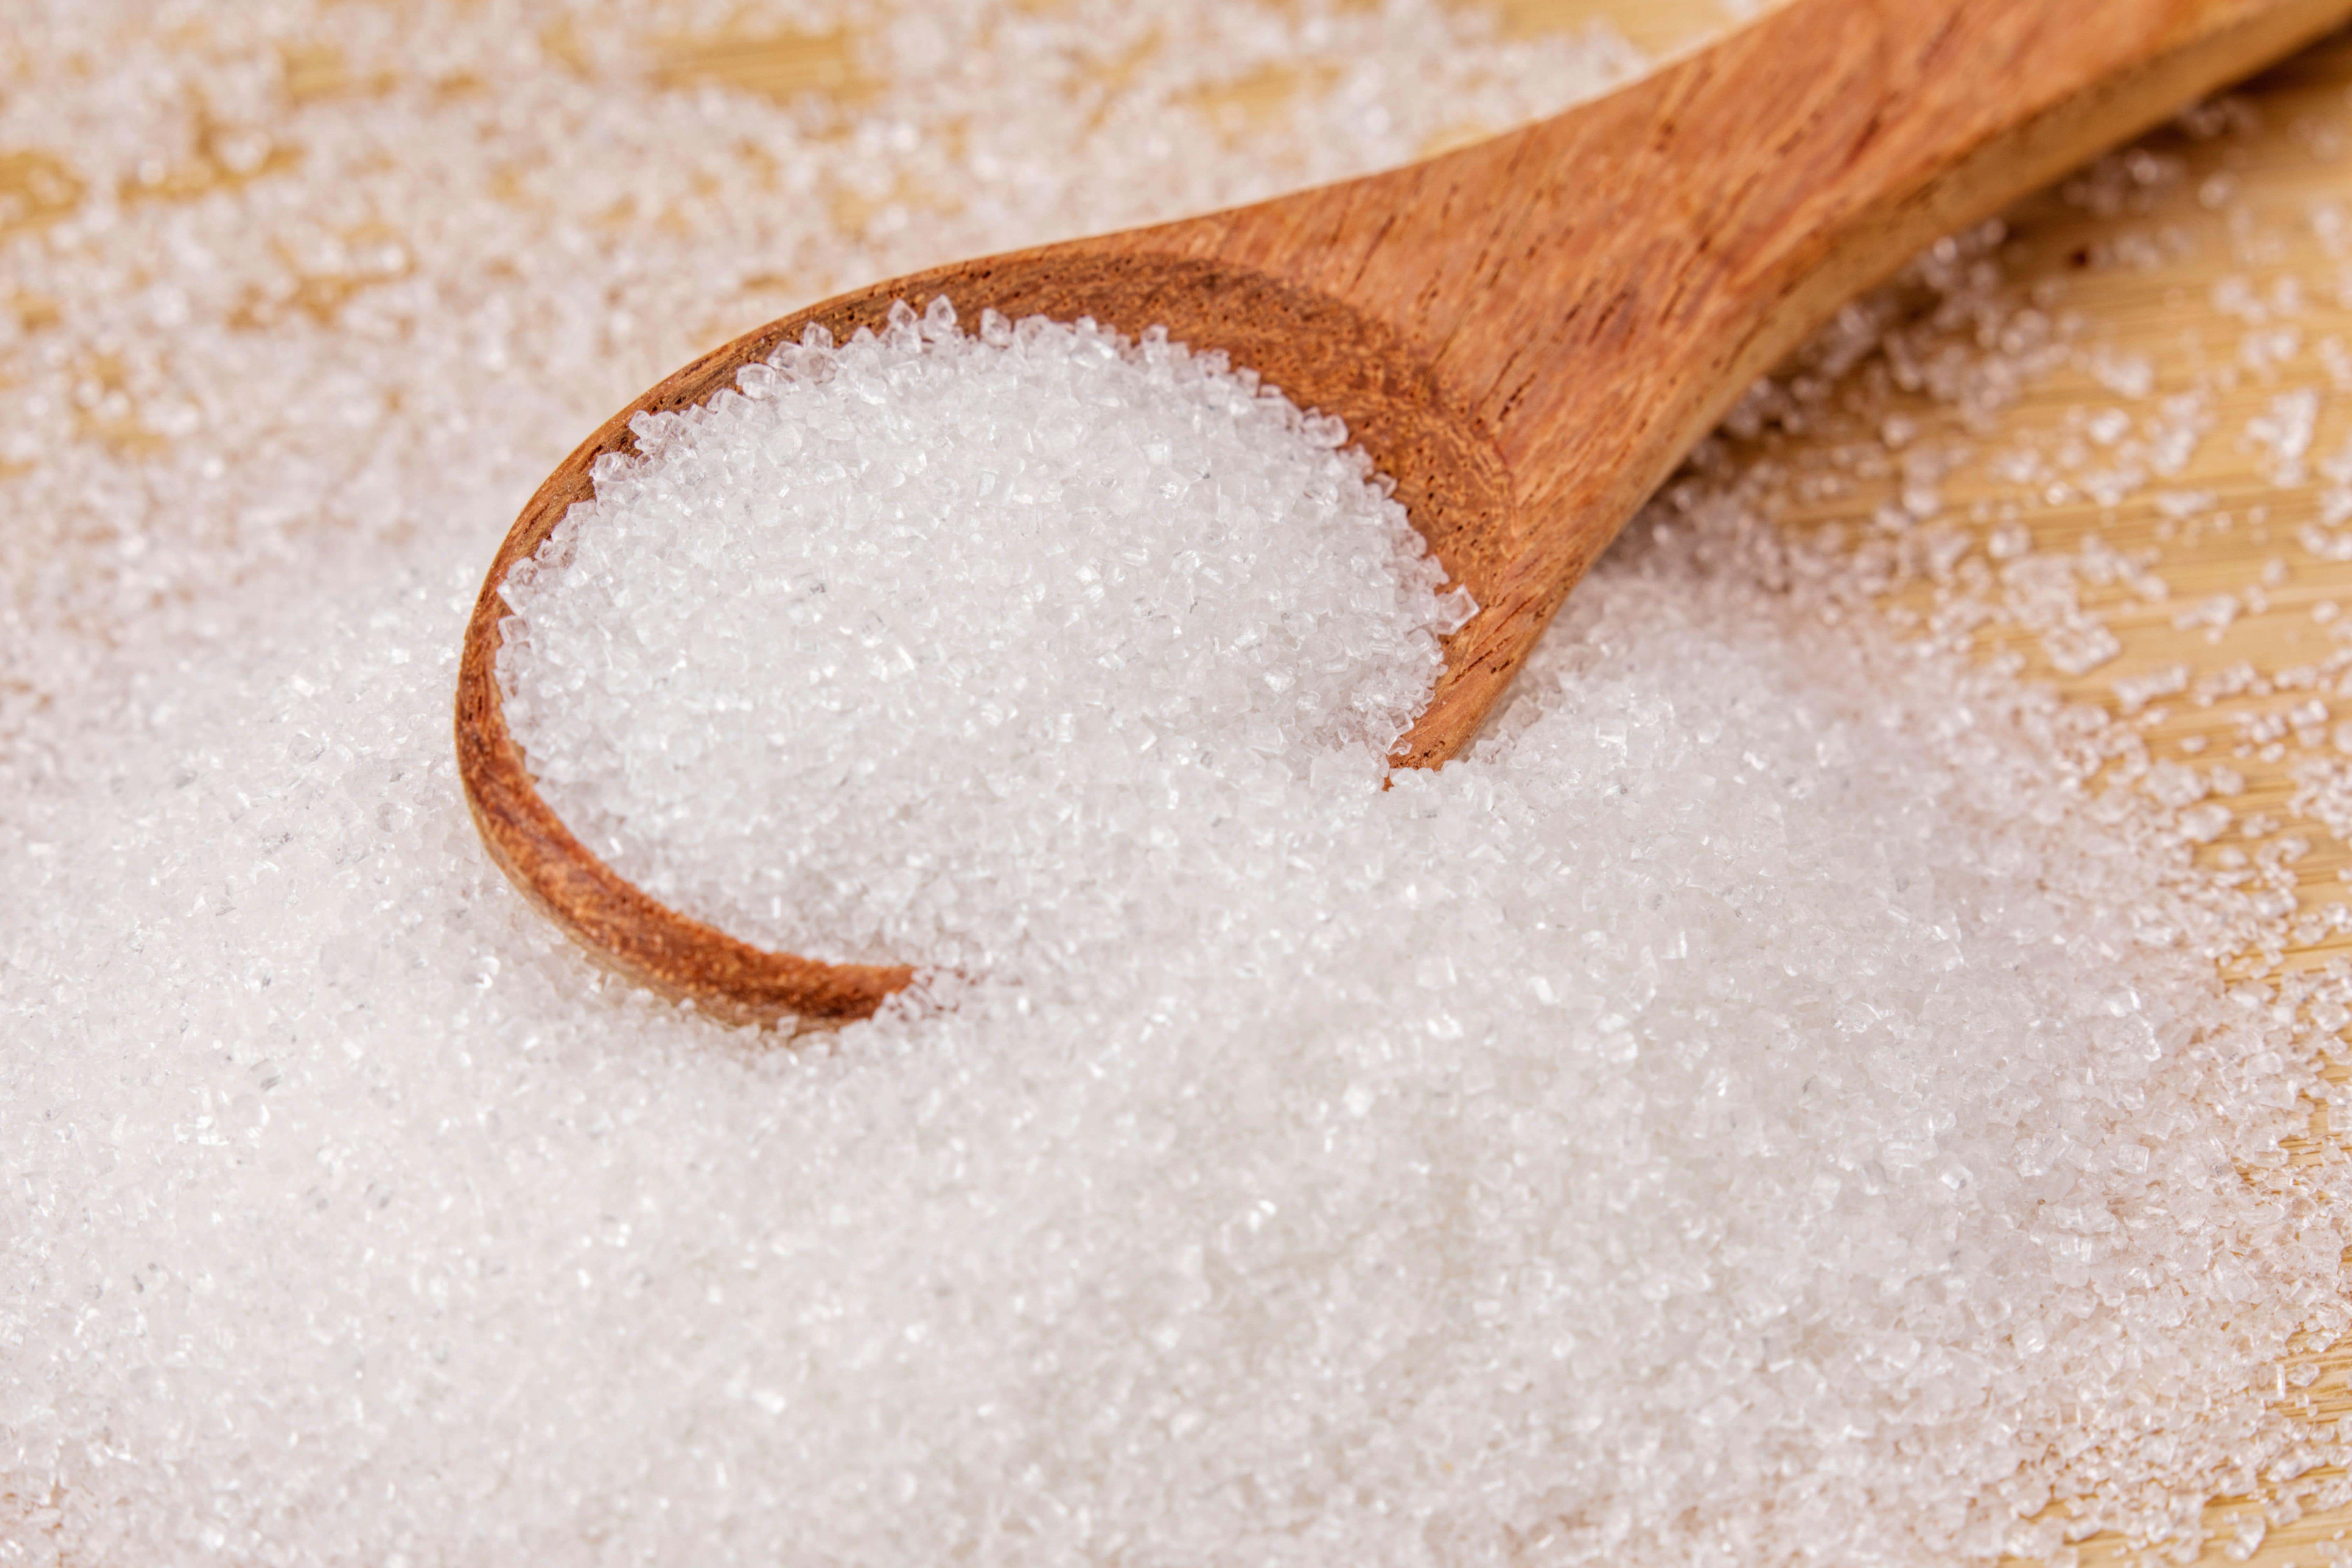 Sugar reduction in the food industry was as much as 82% below the Government’s voluntary target in 2020, latest figures show (Alamy/PA)